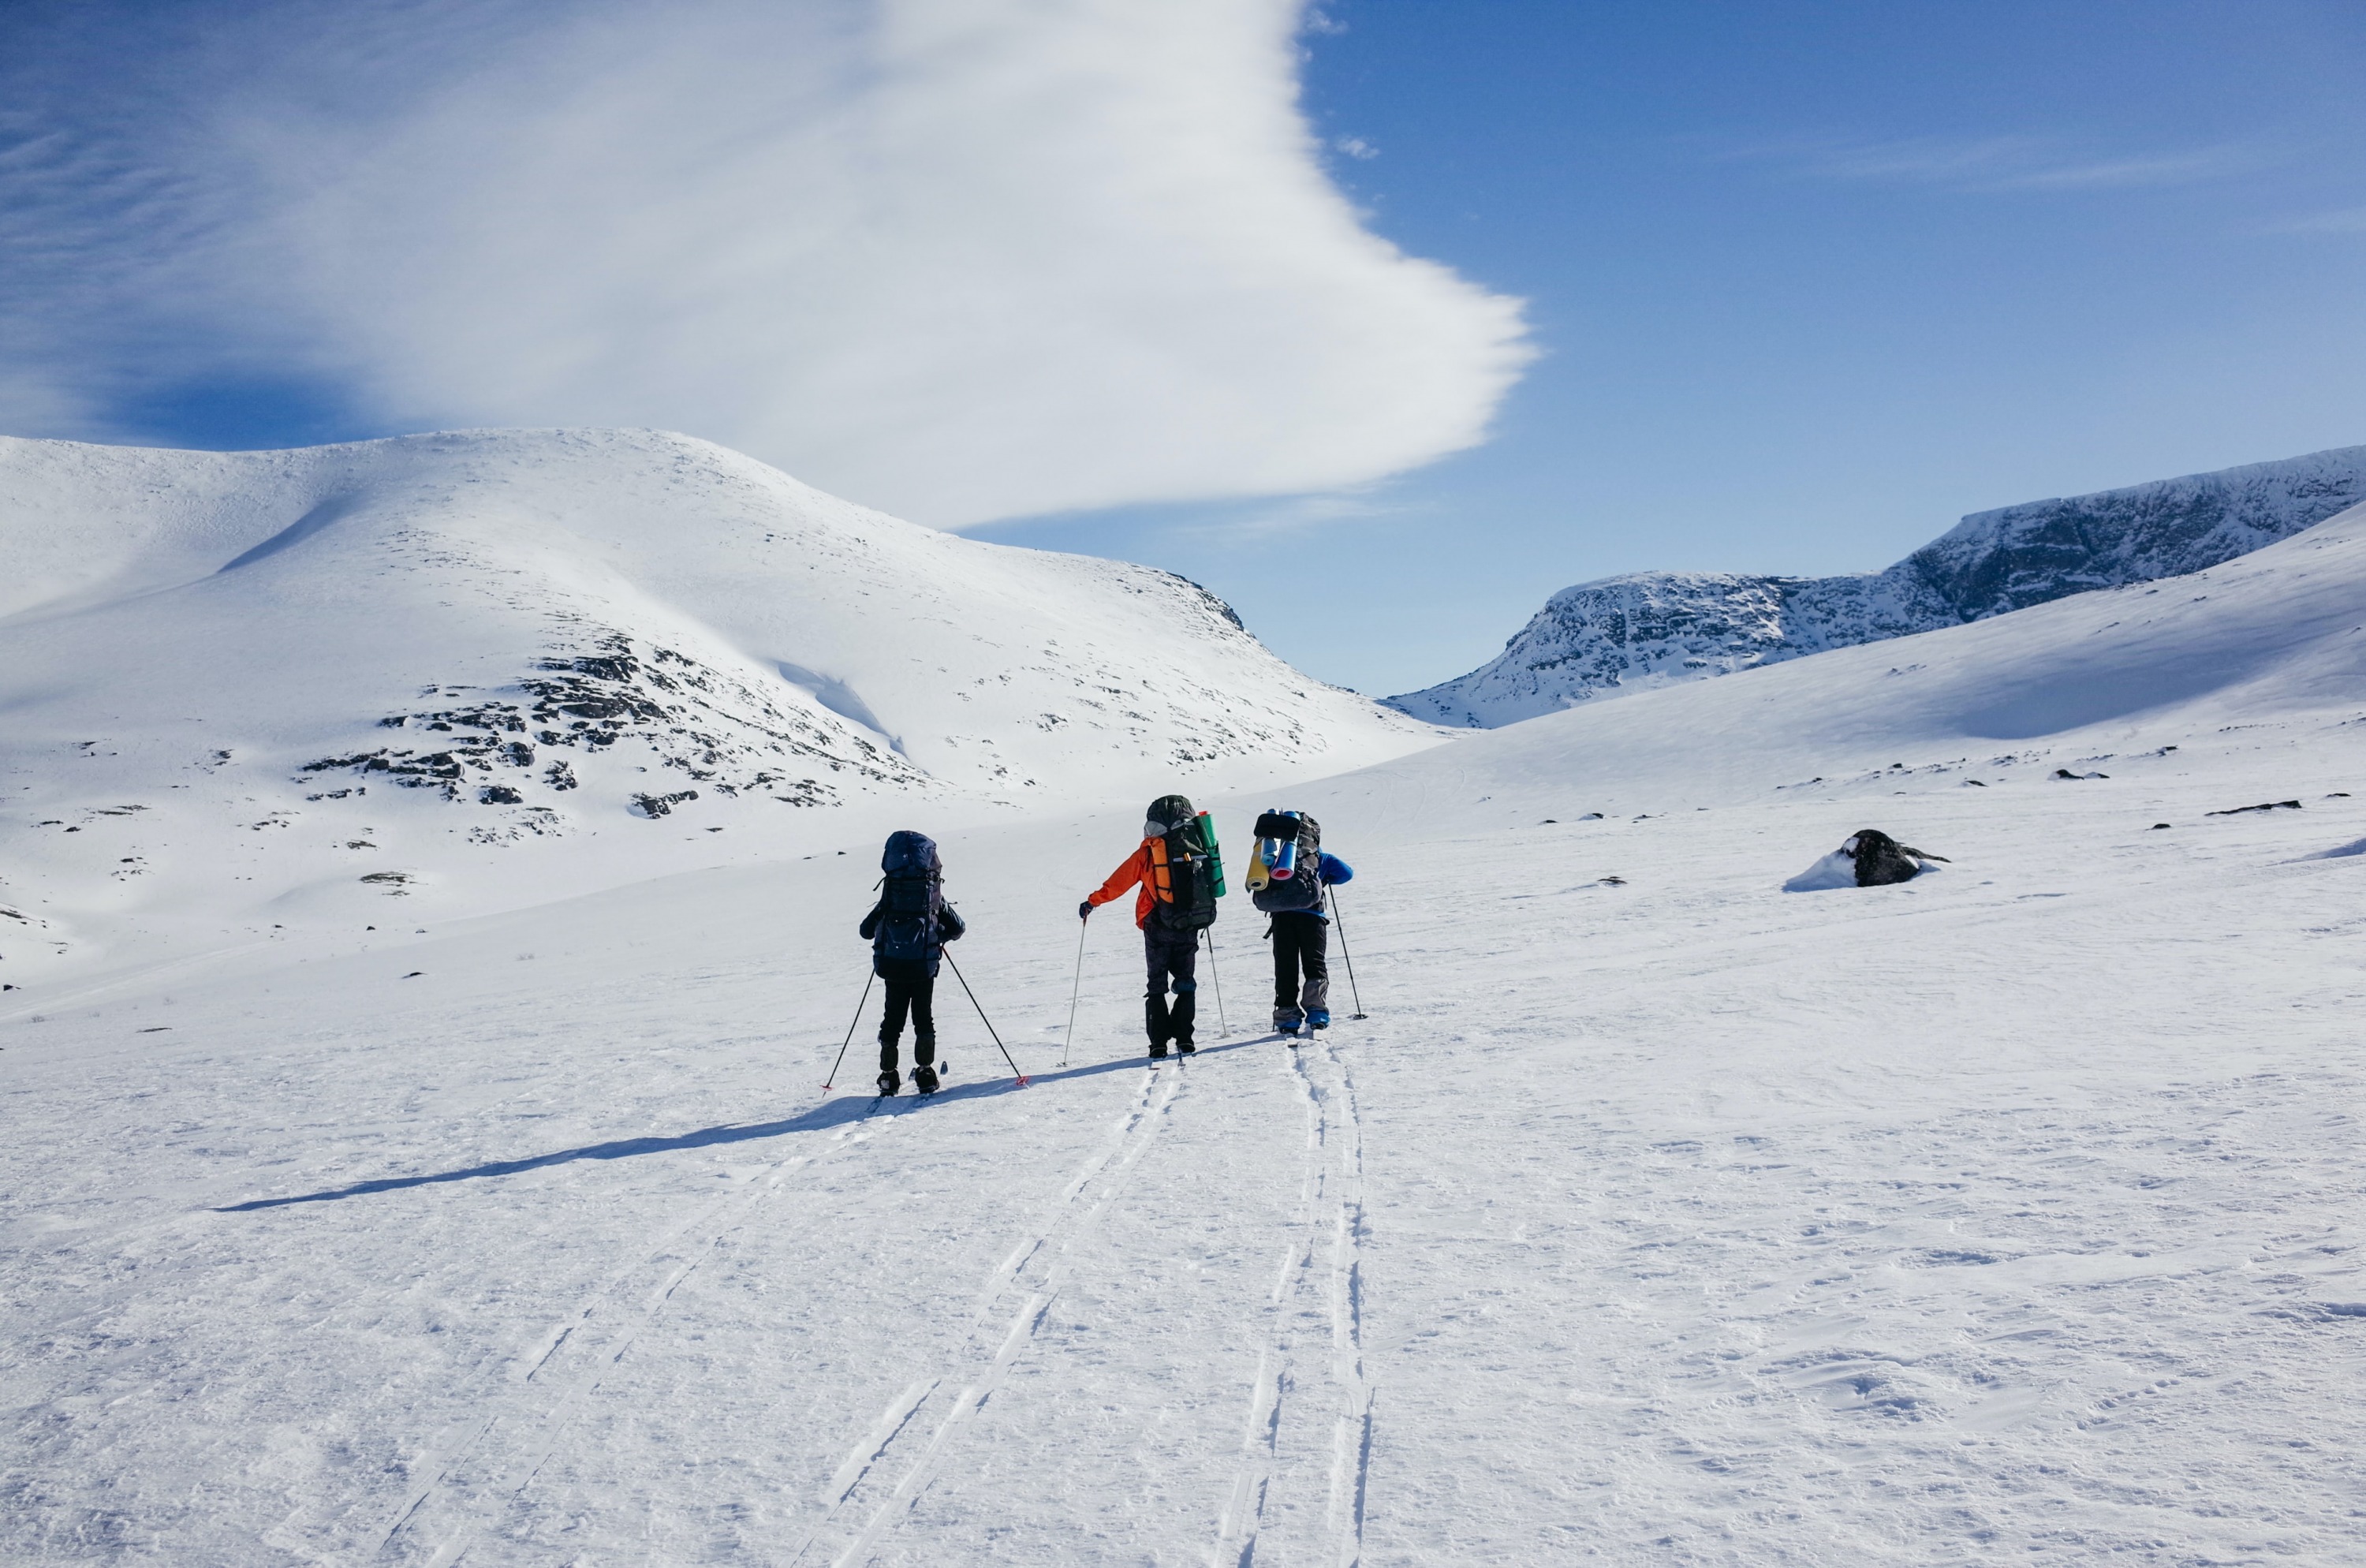 3 hikers making their way through a frozen landscape.